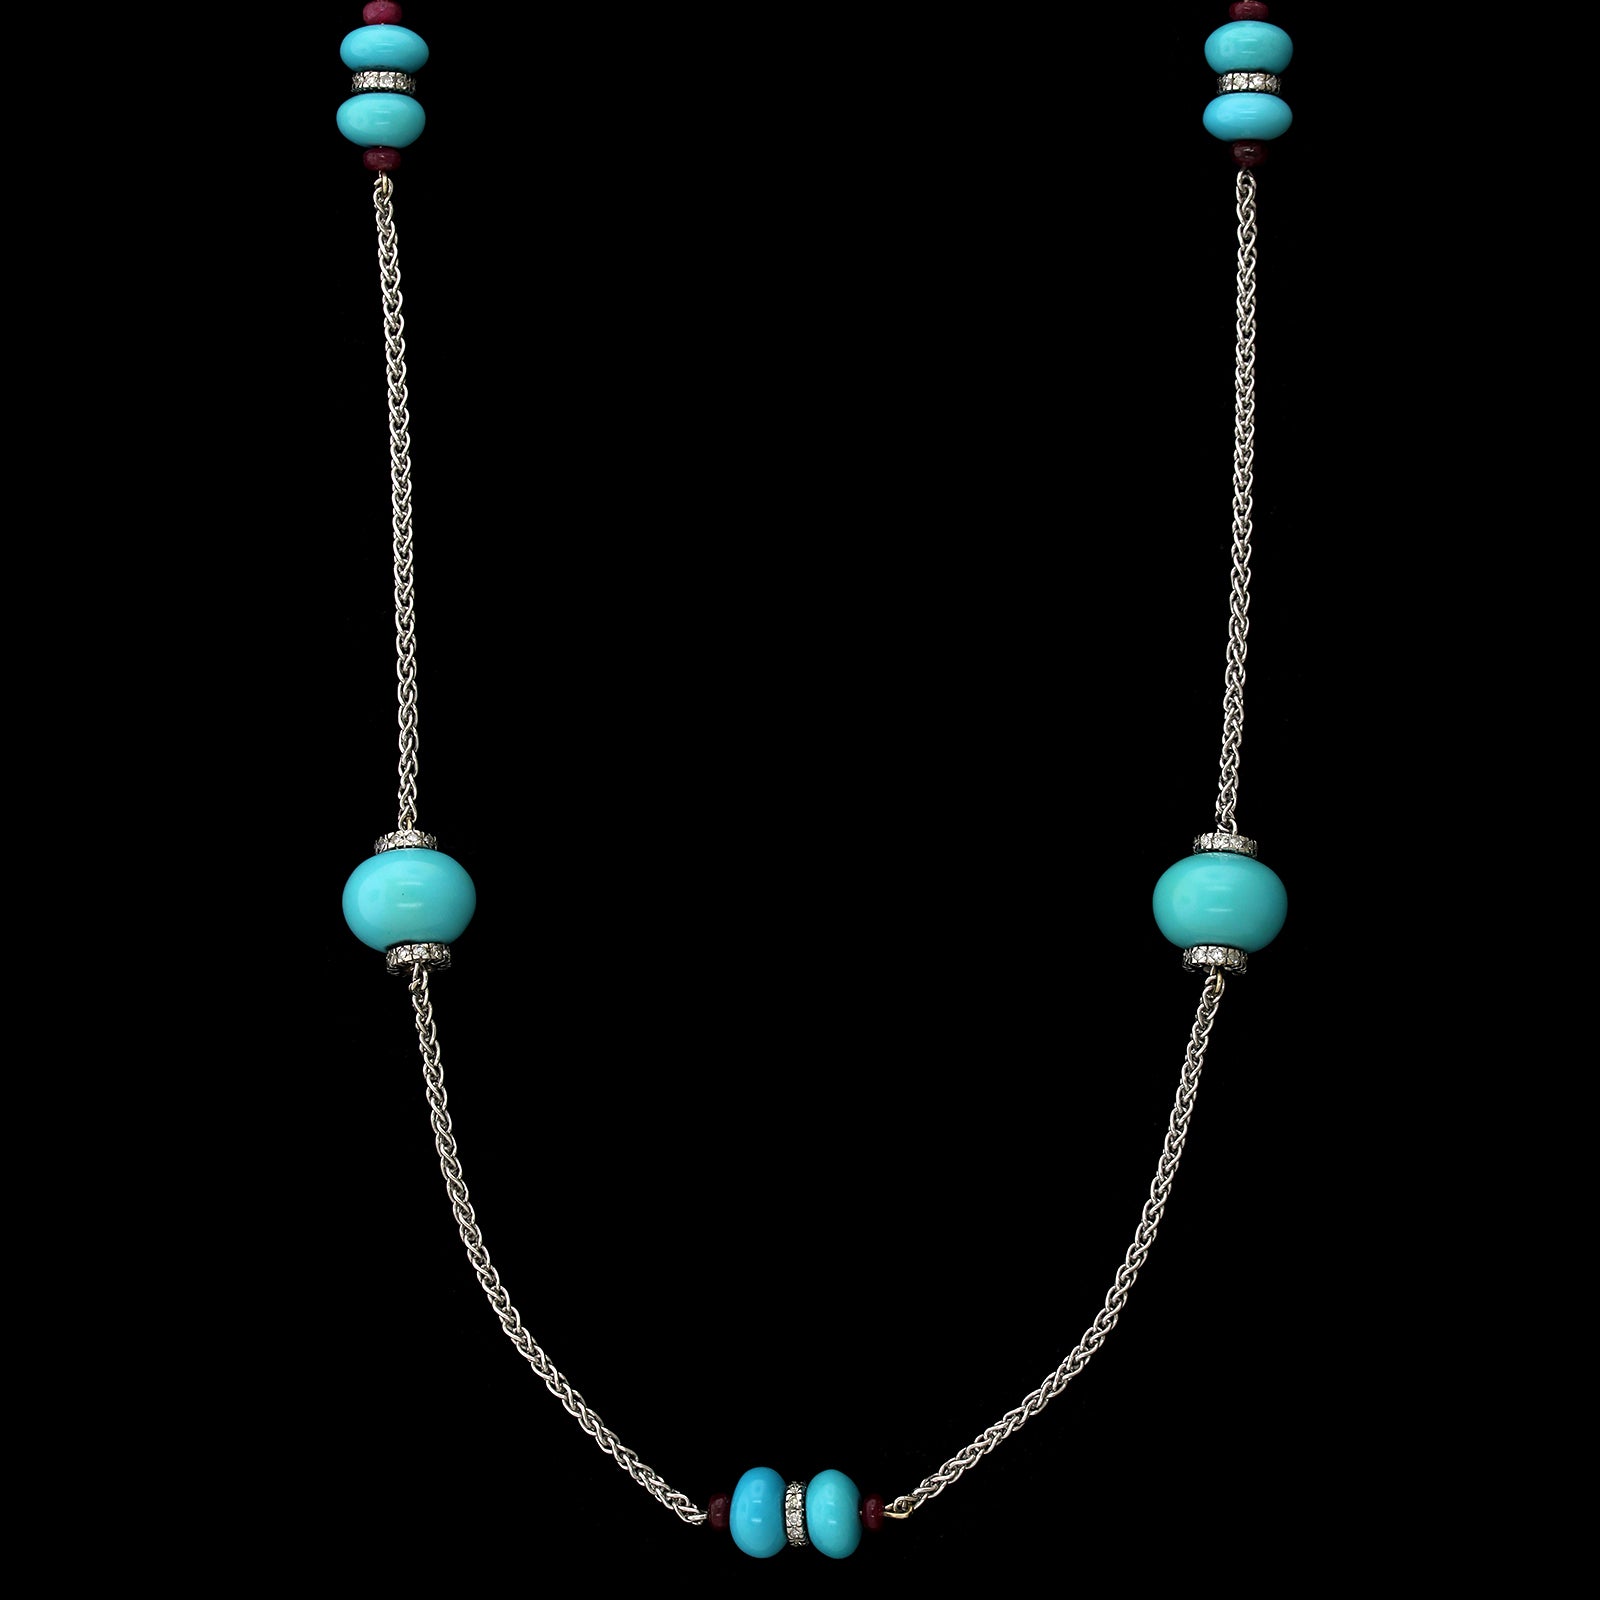 18K White Gold Estate Turquoise, Ruby and Diamond Necklace